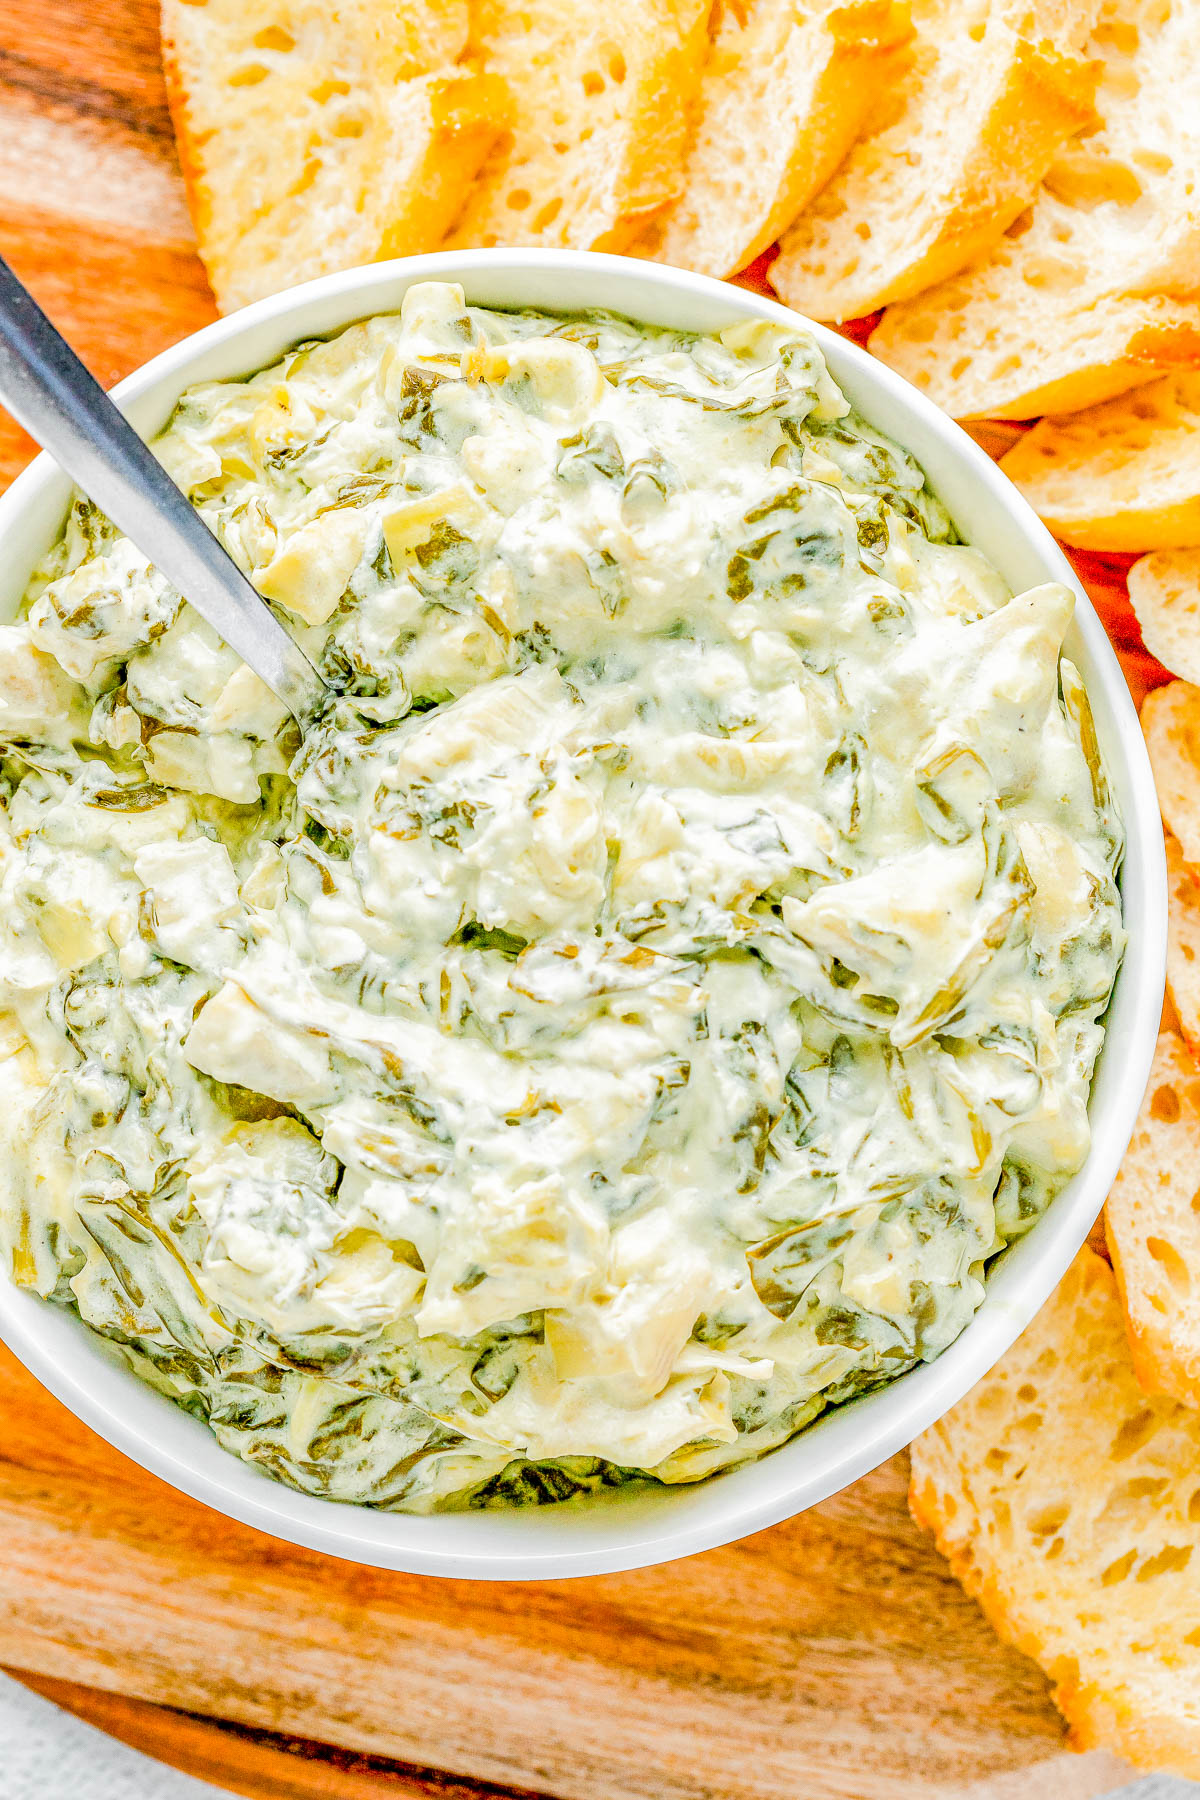 Crockpot Spinach Artichoke Dip - Creamy, cheesy, and best of all SO EASY! Add the spinach, artichokes, mozzarella, and Parmesan to your slow cooker and let it do all the work! All you have to do is stir, serve, and watch everyone devour the dip! It's better than any restaurant version and perfect for holiday entertaining, Christmas and New Year's parties, Super Bowl, or anytime you need the BEST spinach and artichoke dip!